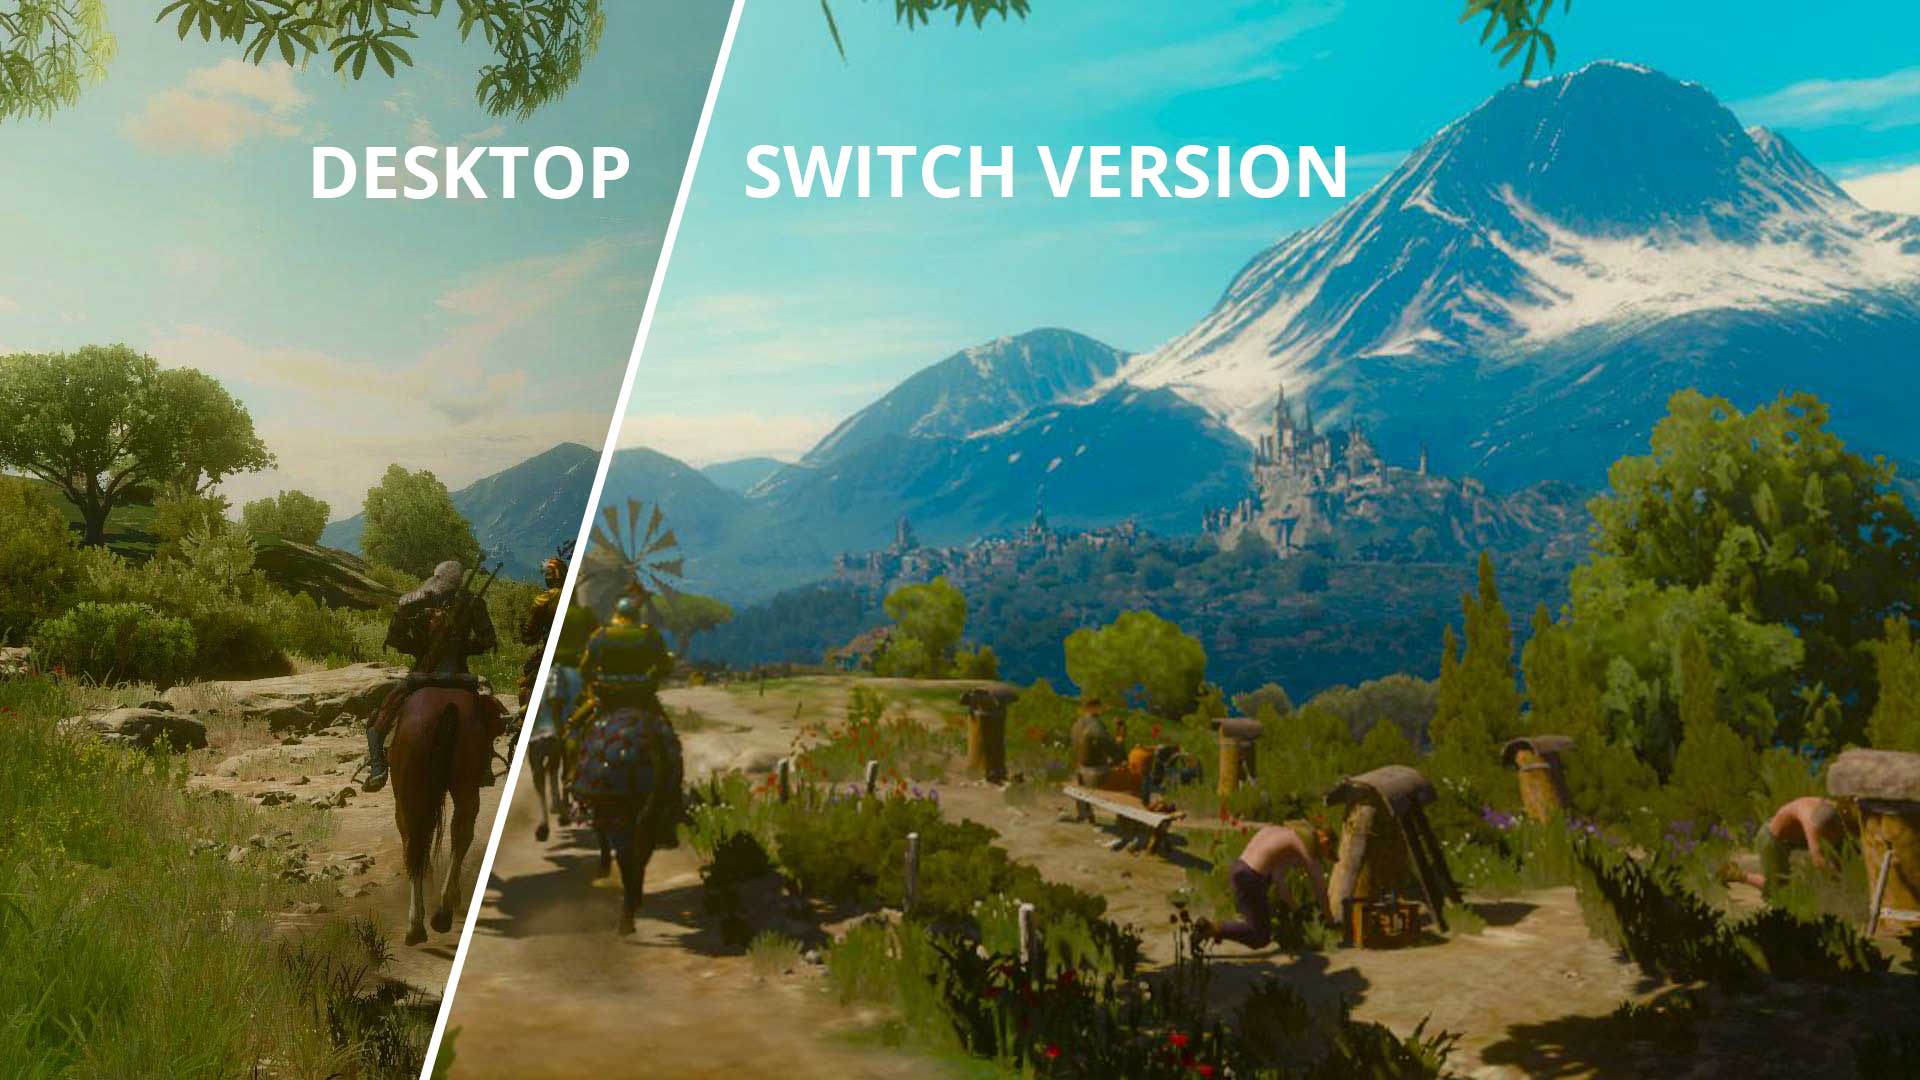 C Users mail Desktop GG content witcher3 switch witcher 3 comparison